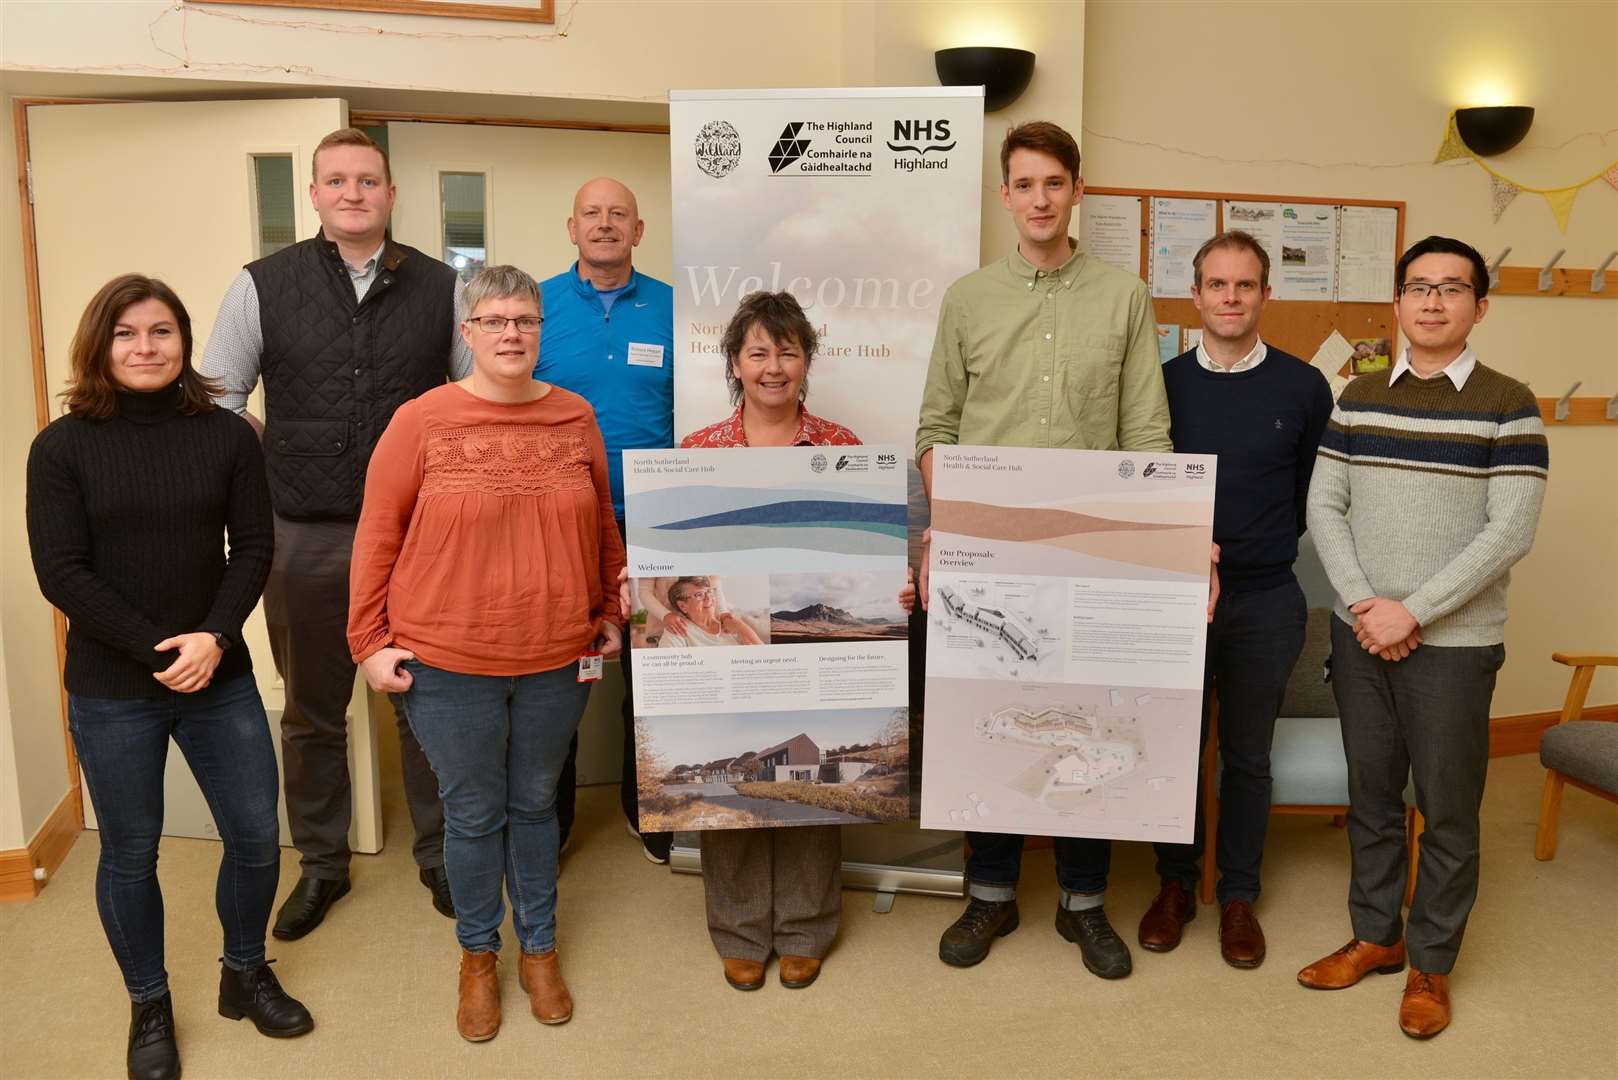 At the drop-in session were, from left: Catriona Leggat, architect; Calum Sinclair, estates officer HC; Christian Nicolson, NHS district manager Caithness; Richard Heggie, project consultant; Kate Kenmure, NHS Sutherland district manager; Martin Lambie, architect; Joe Dunn, Wildland project manager, Zhen Ron Tan, NHS Highland project officer. Picture: Jim A Johnston